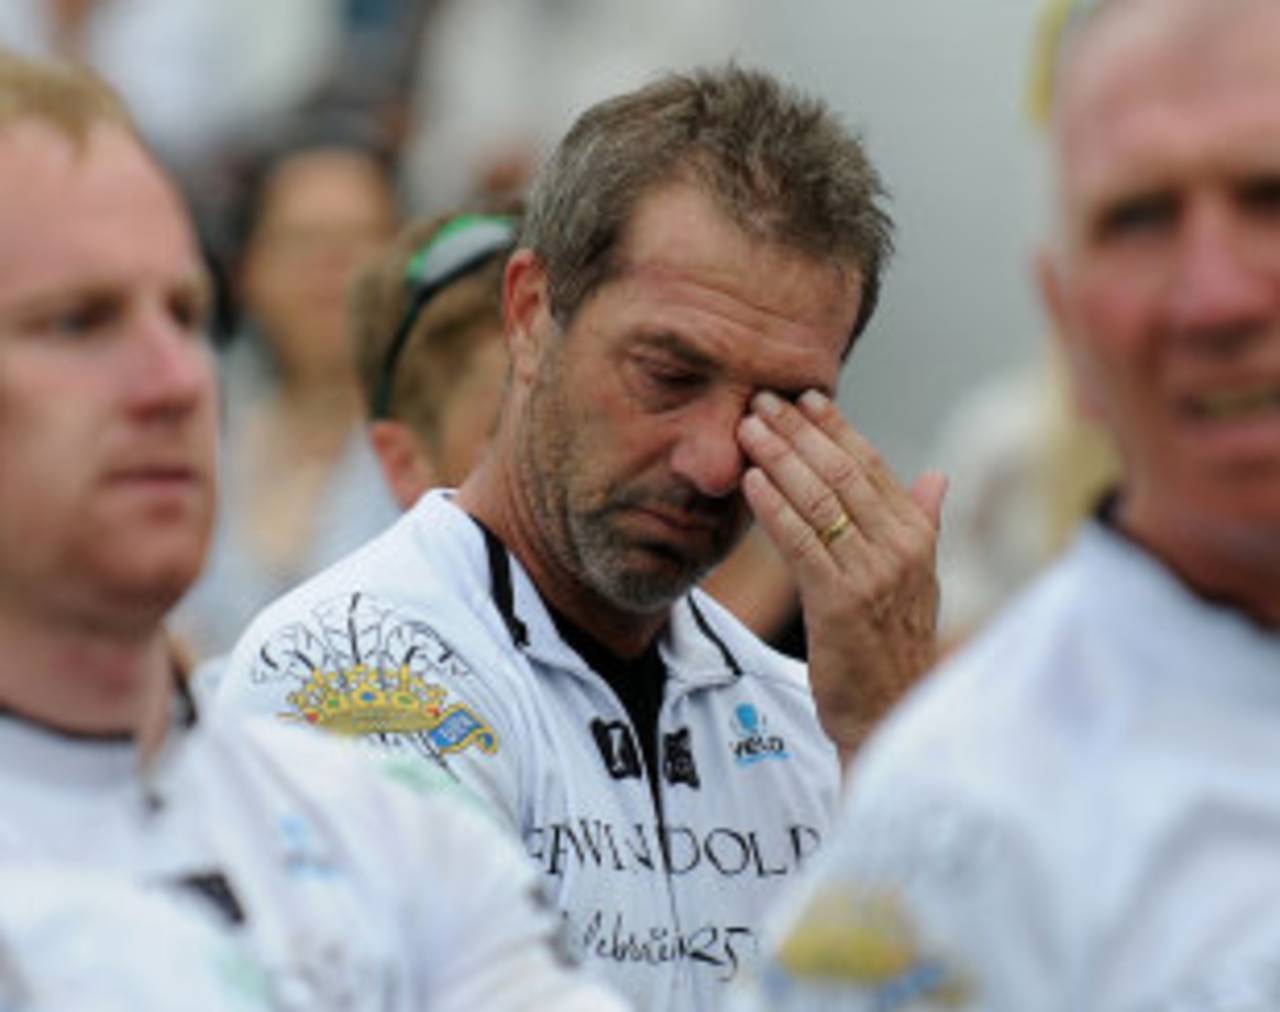 Matthew Maynard after completing the cycle ride, Surrey v Glamorgan, CB40, The Oval, August 21, 2012